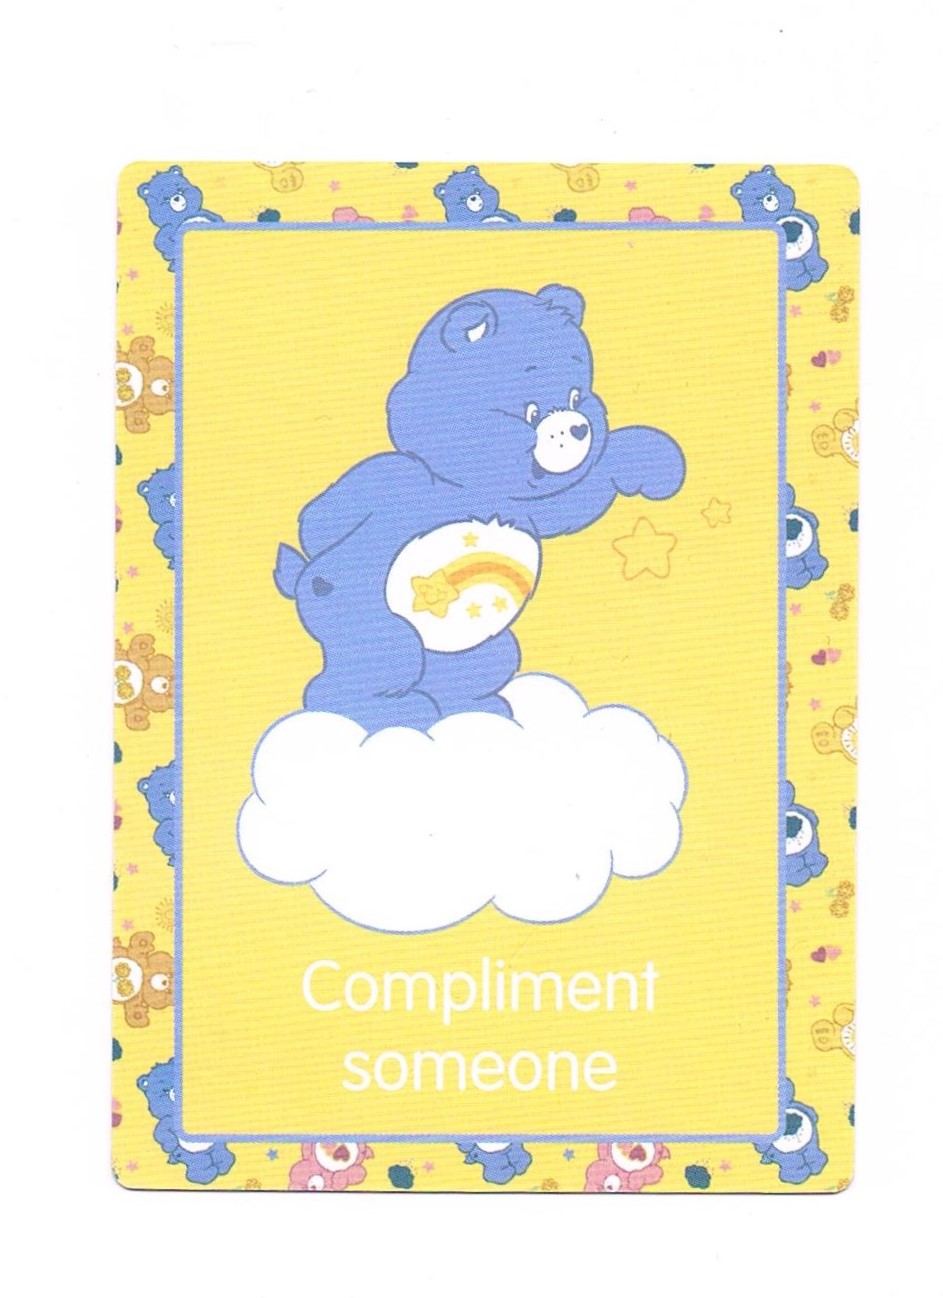 01. compliment someone